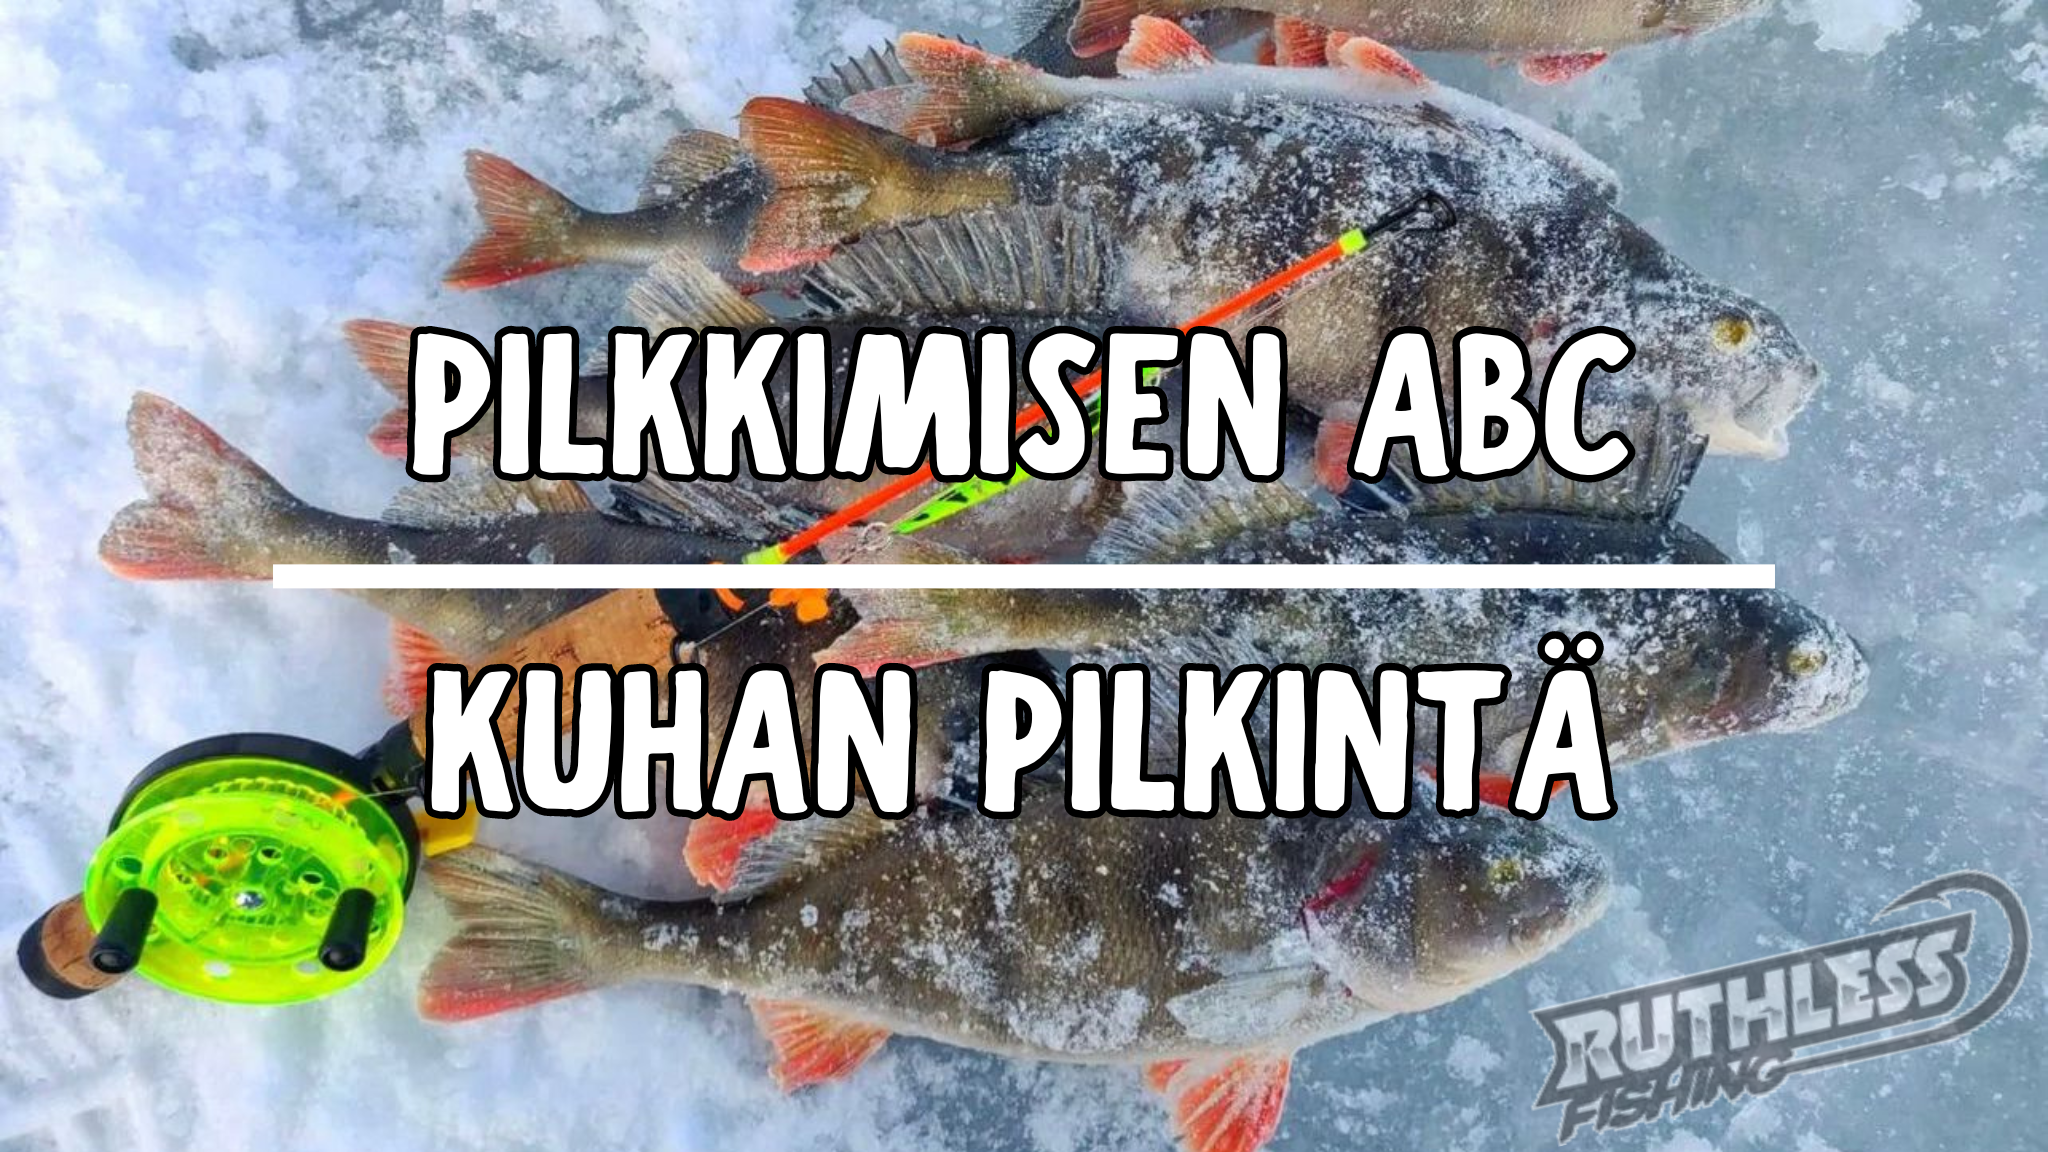 You are currently viewing Pilkkimisen ABC – Vinkit kuhan pilkkimiseen